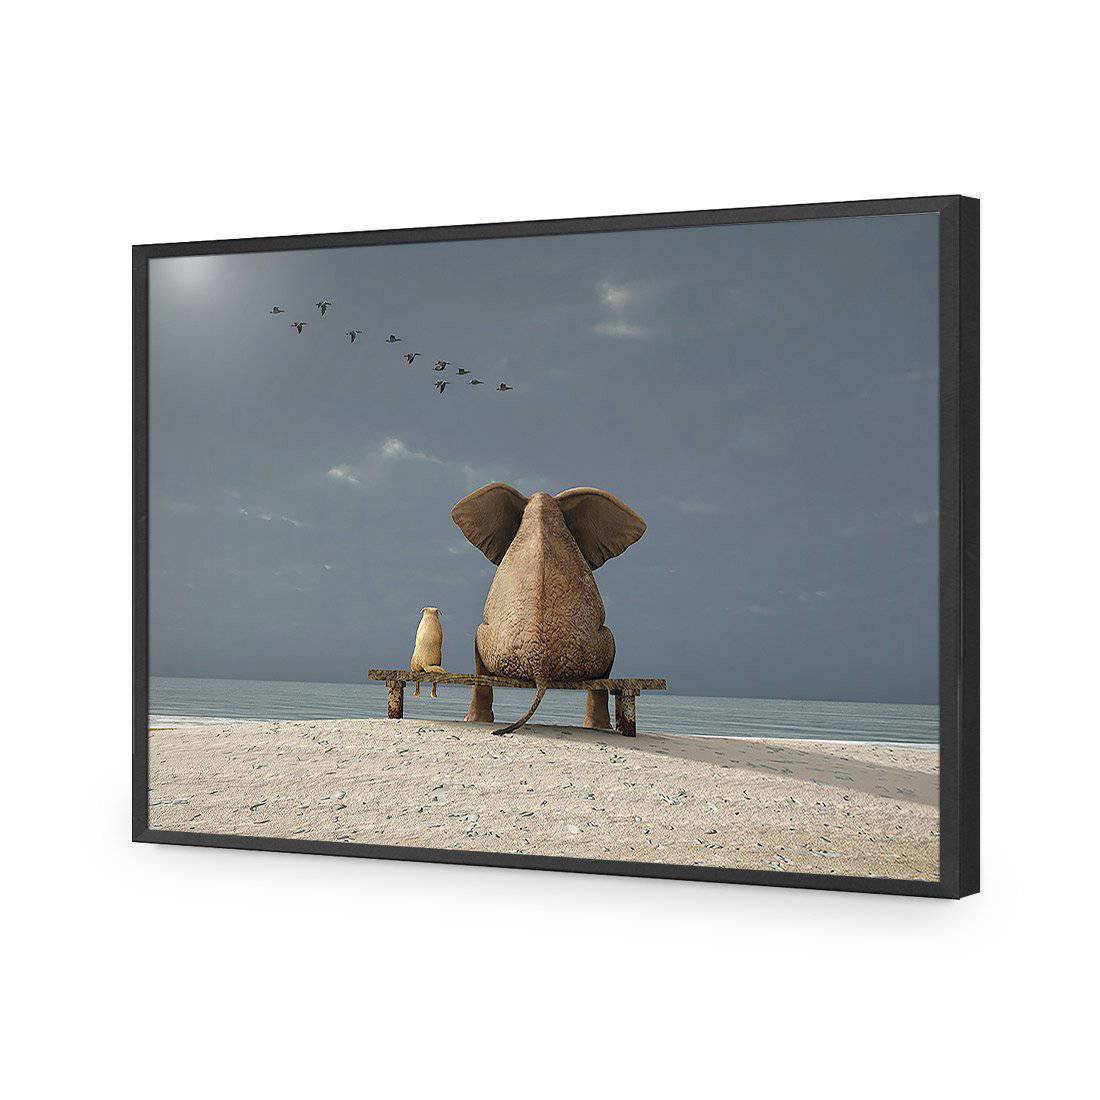 Little And Large-Acrylic-Wall Art Design-Without Border-Acrylic - Black Frame-45x30cm-Wall Art Designs